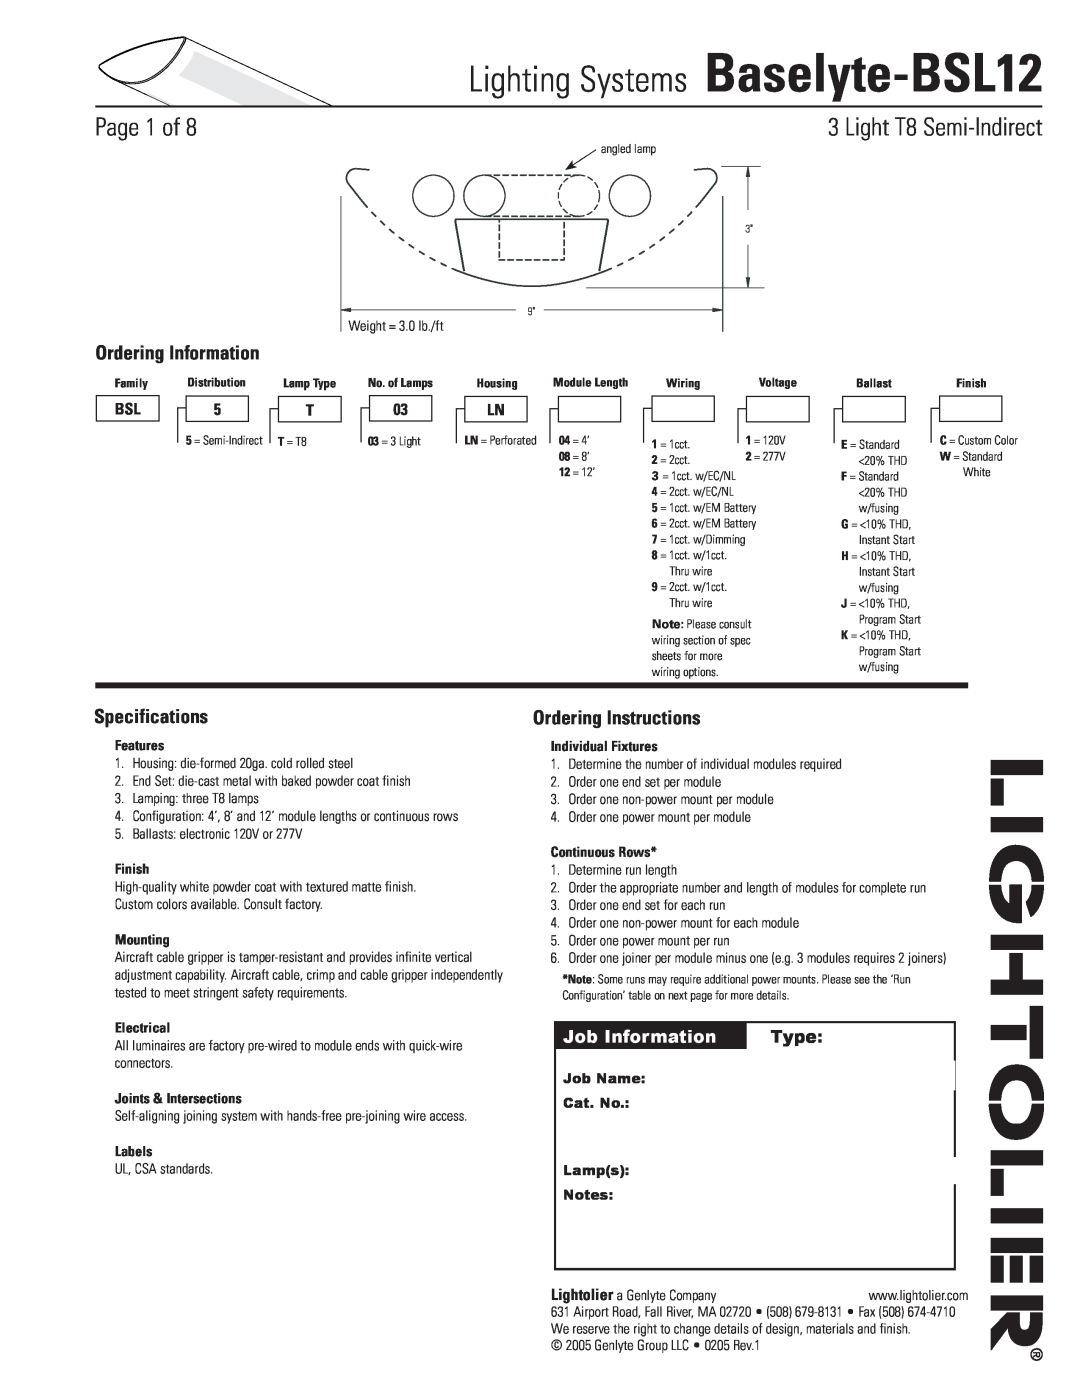 Lightolier specifications Lighting Systems Baselyte-BSL12, Page  of, Light T8 Semi-Indirect, Ordering Information 